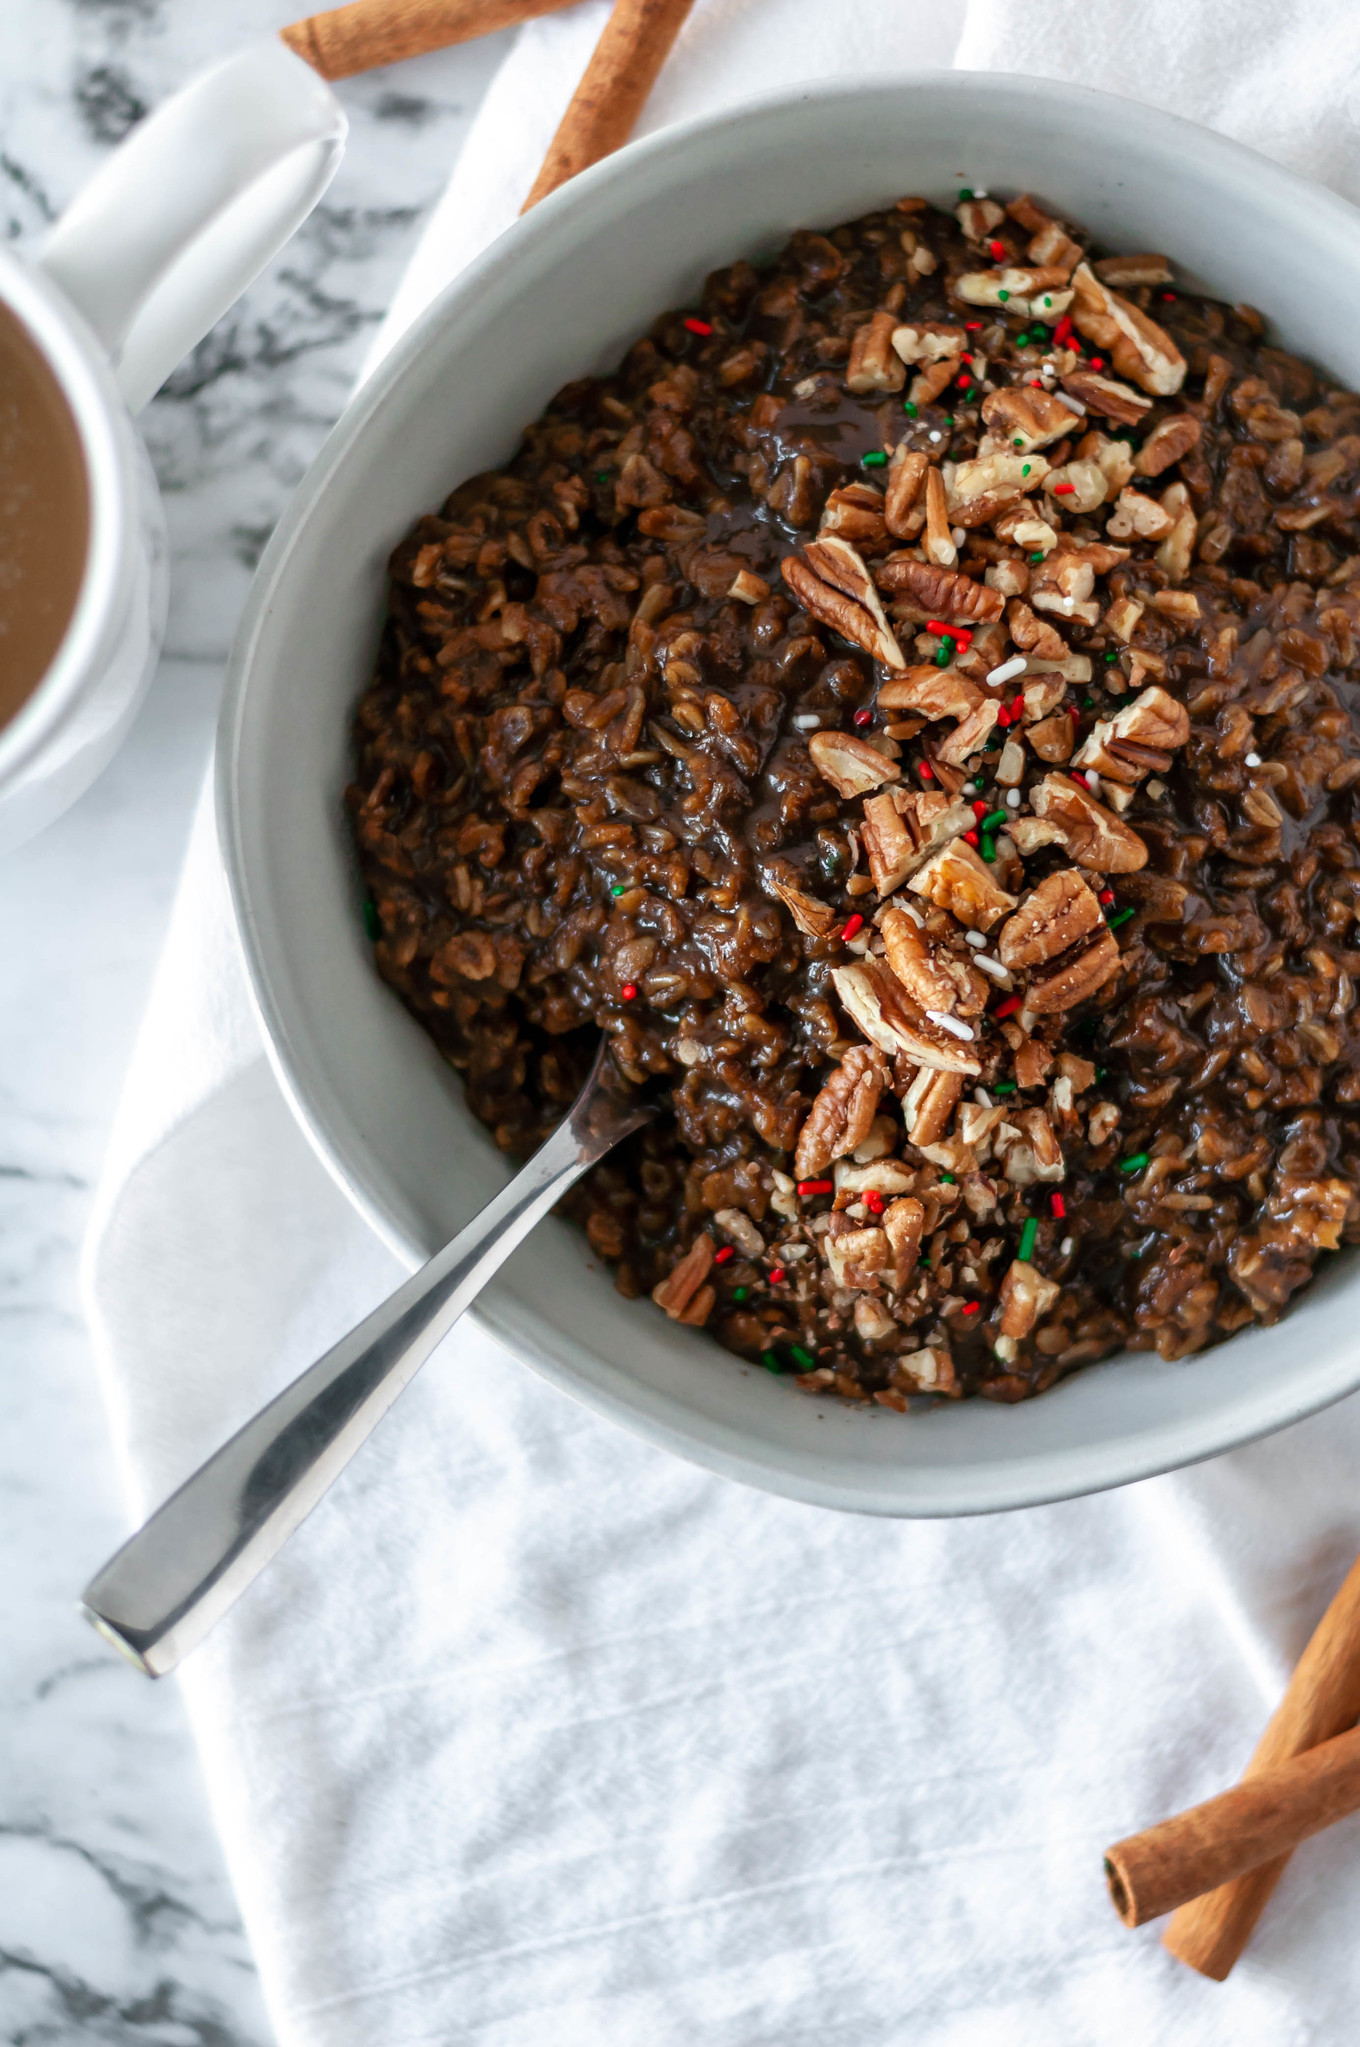 Instant Pot Gingerbread Oatmeal will bring all the holiday spirit. Tons of gingerbread flavor packed into breakfast for a healthy spin on a holiday favorite.